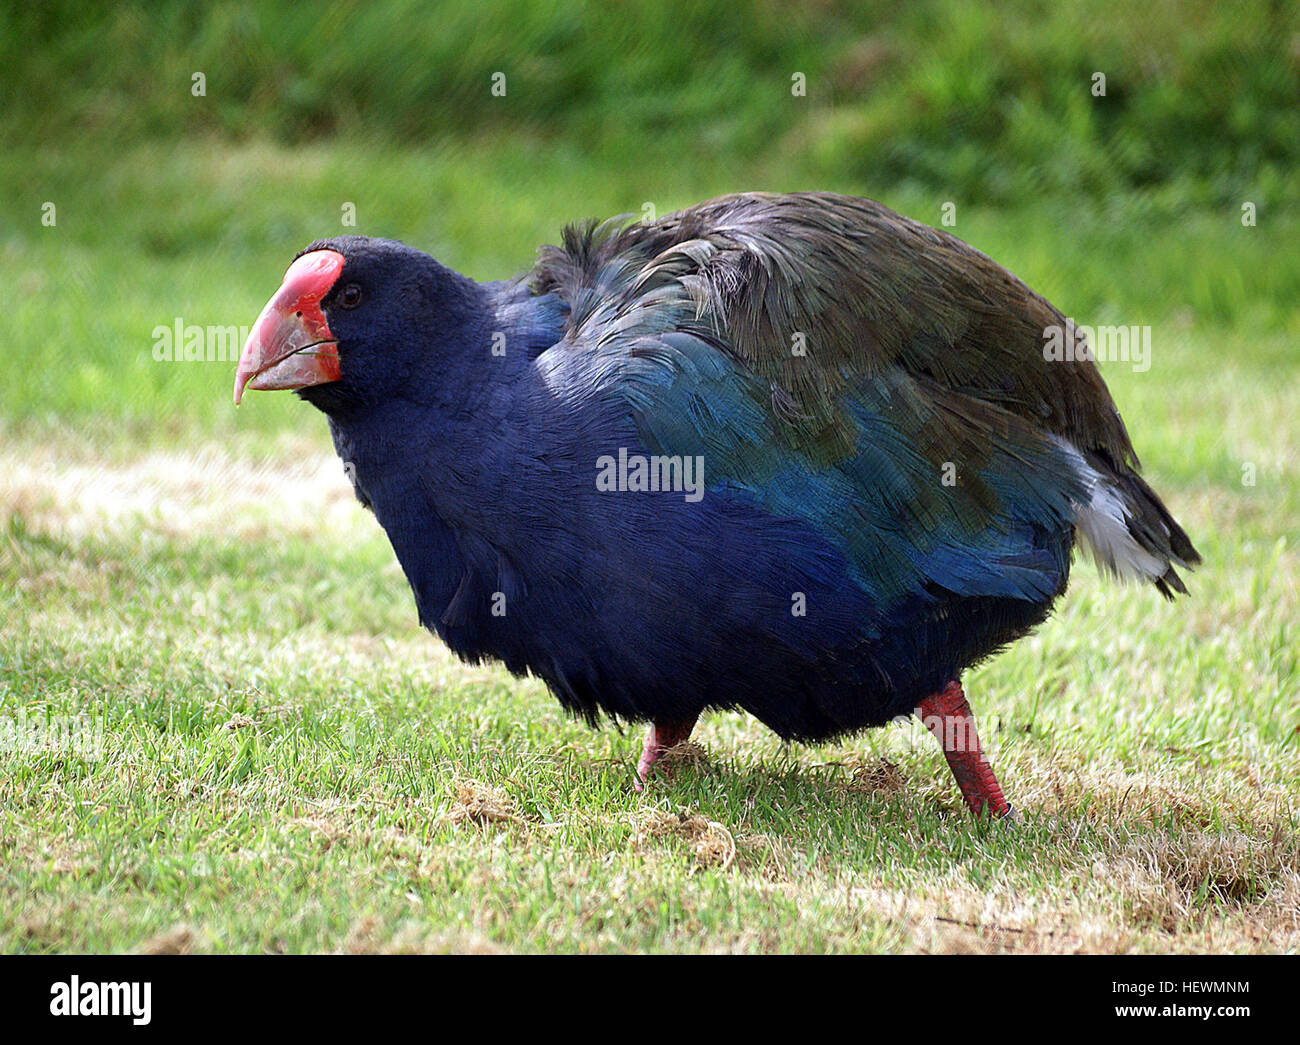 The South Island takahē, a large flightless rail, hit headlines in the late 1940s. Takahē were thought to be extinct – but then, in 1948, Geoffrey Orbell rediscovered the South Island species (Porphyrio hochstetteri) in Fiordland’s Murchison Mountains. However, the North Island takahē (Porphyrio mantelli) is extinct. South Island takahē  Weighing up to 4 kilograms and 63 centimetres long, the South Island takahē is the world’s largest rail. Several million years ago its ancestors flew from Australia to New Zealand, where, without ground predators, the takahē became flightless. This colourful b Stock Photo